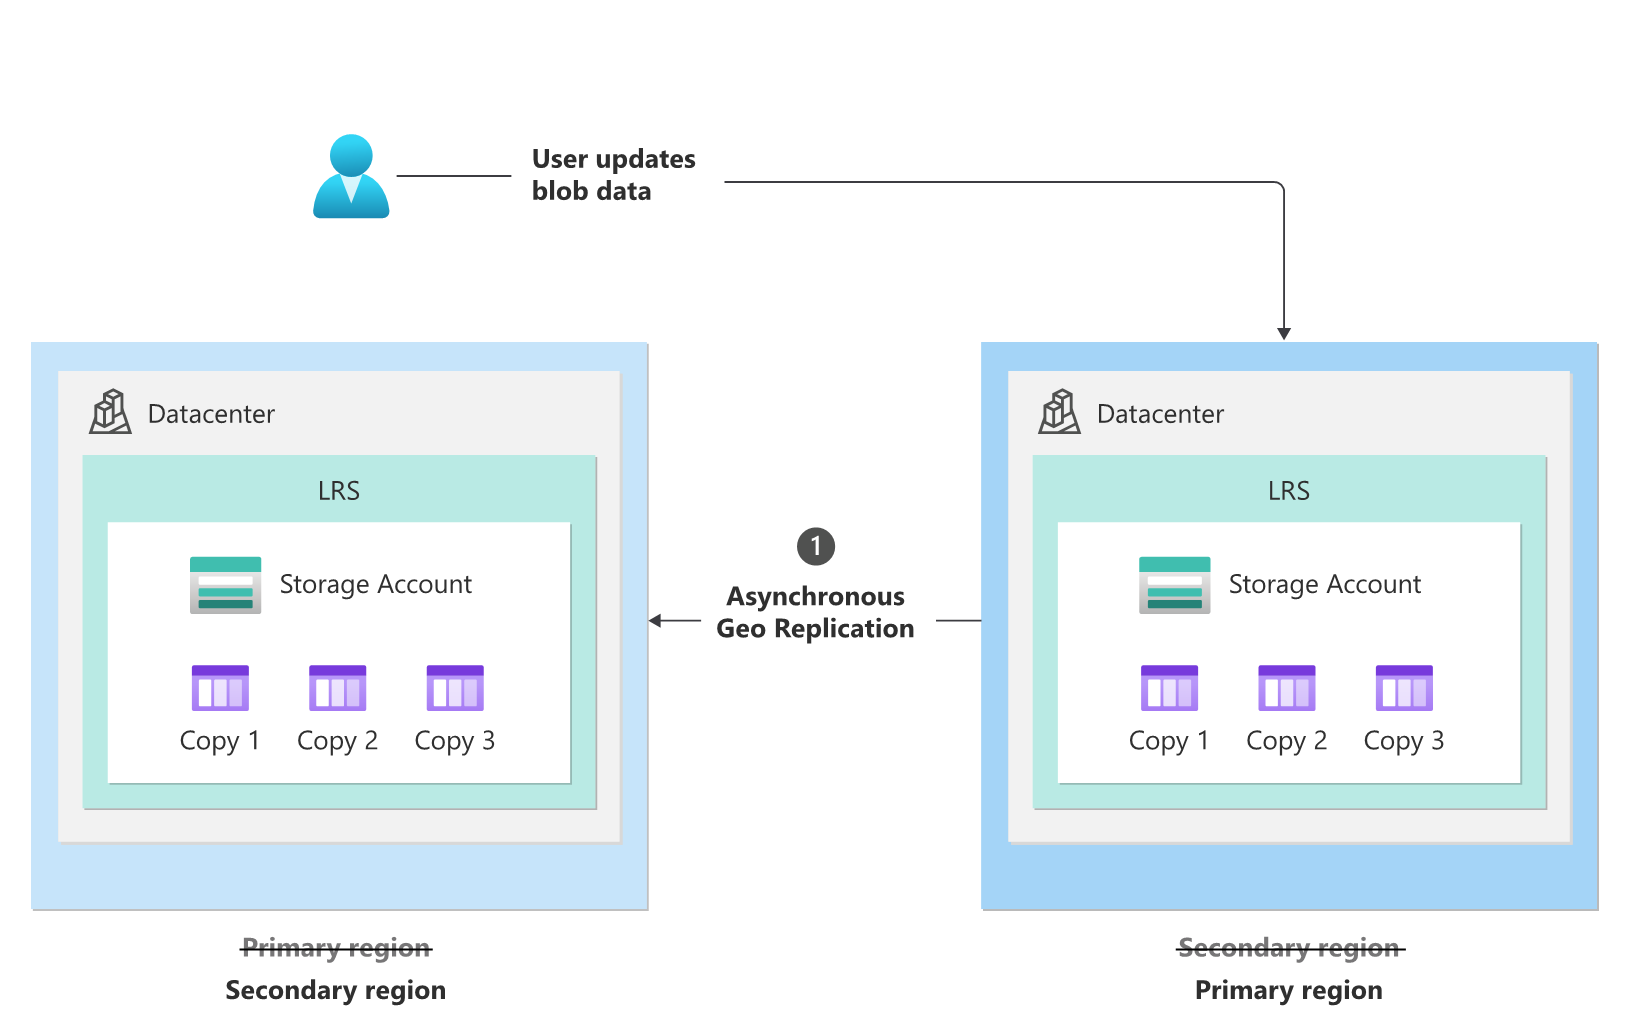 Diagram that shows the storage account status post-failover to secondary region as GRS.